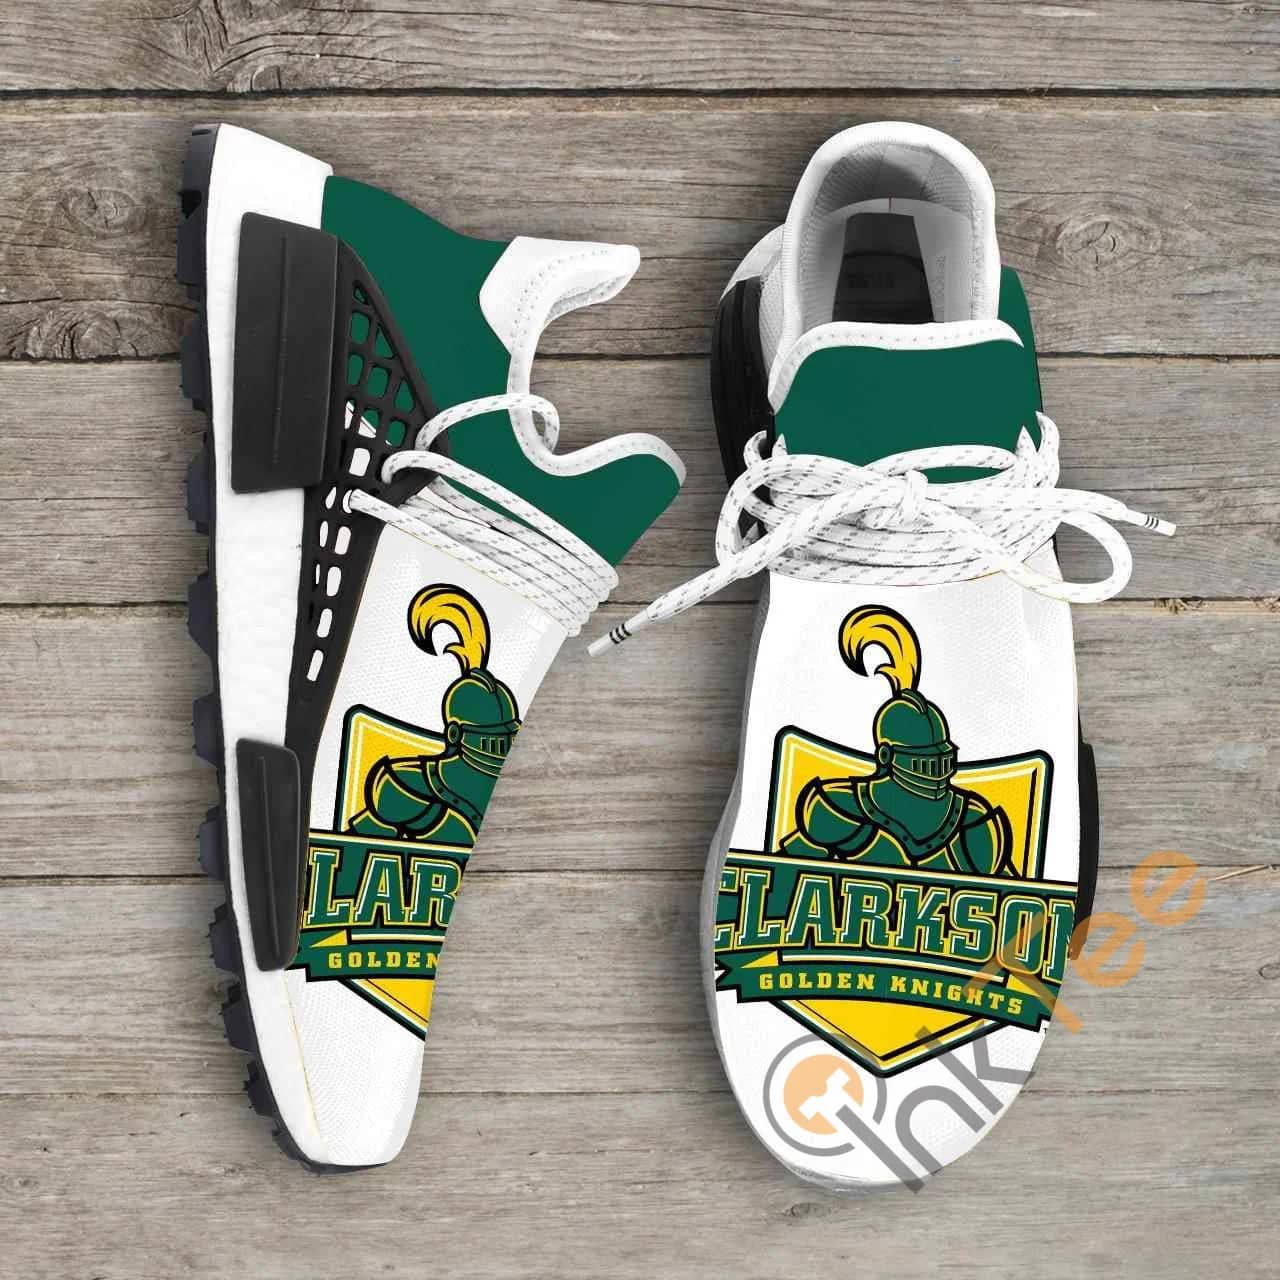 Clarkson Golden Knights Ncaa NMD Human Shoes